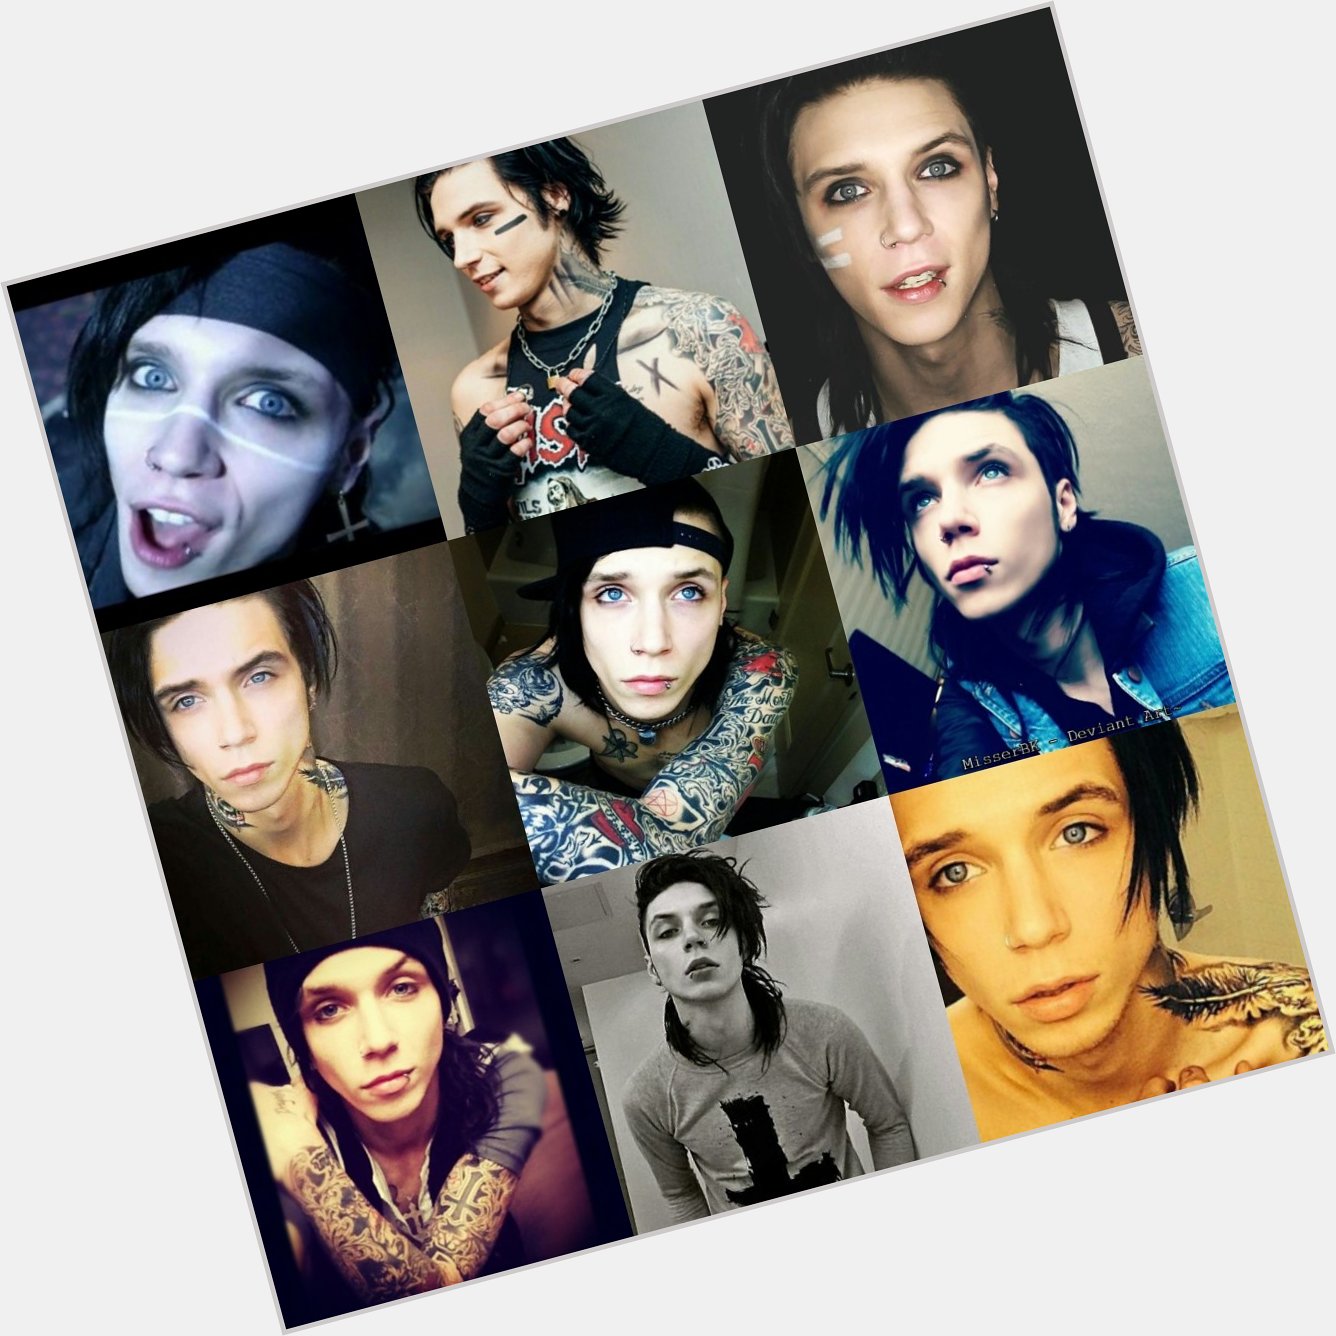 Happy Birthday to this amazing guy! Hope he has a good day!!! Happy Birthday Andy Biersack 